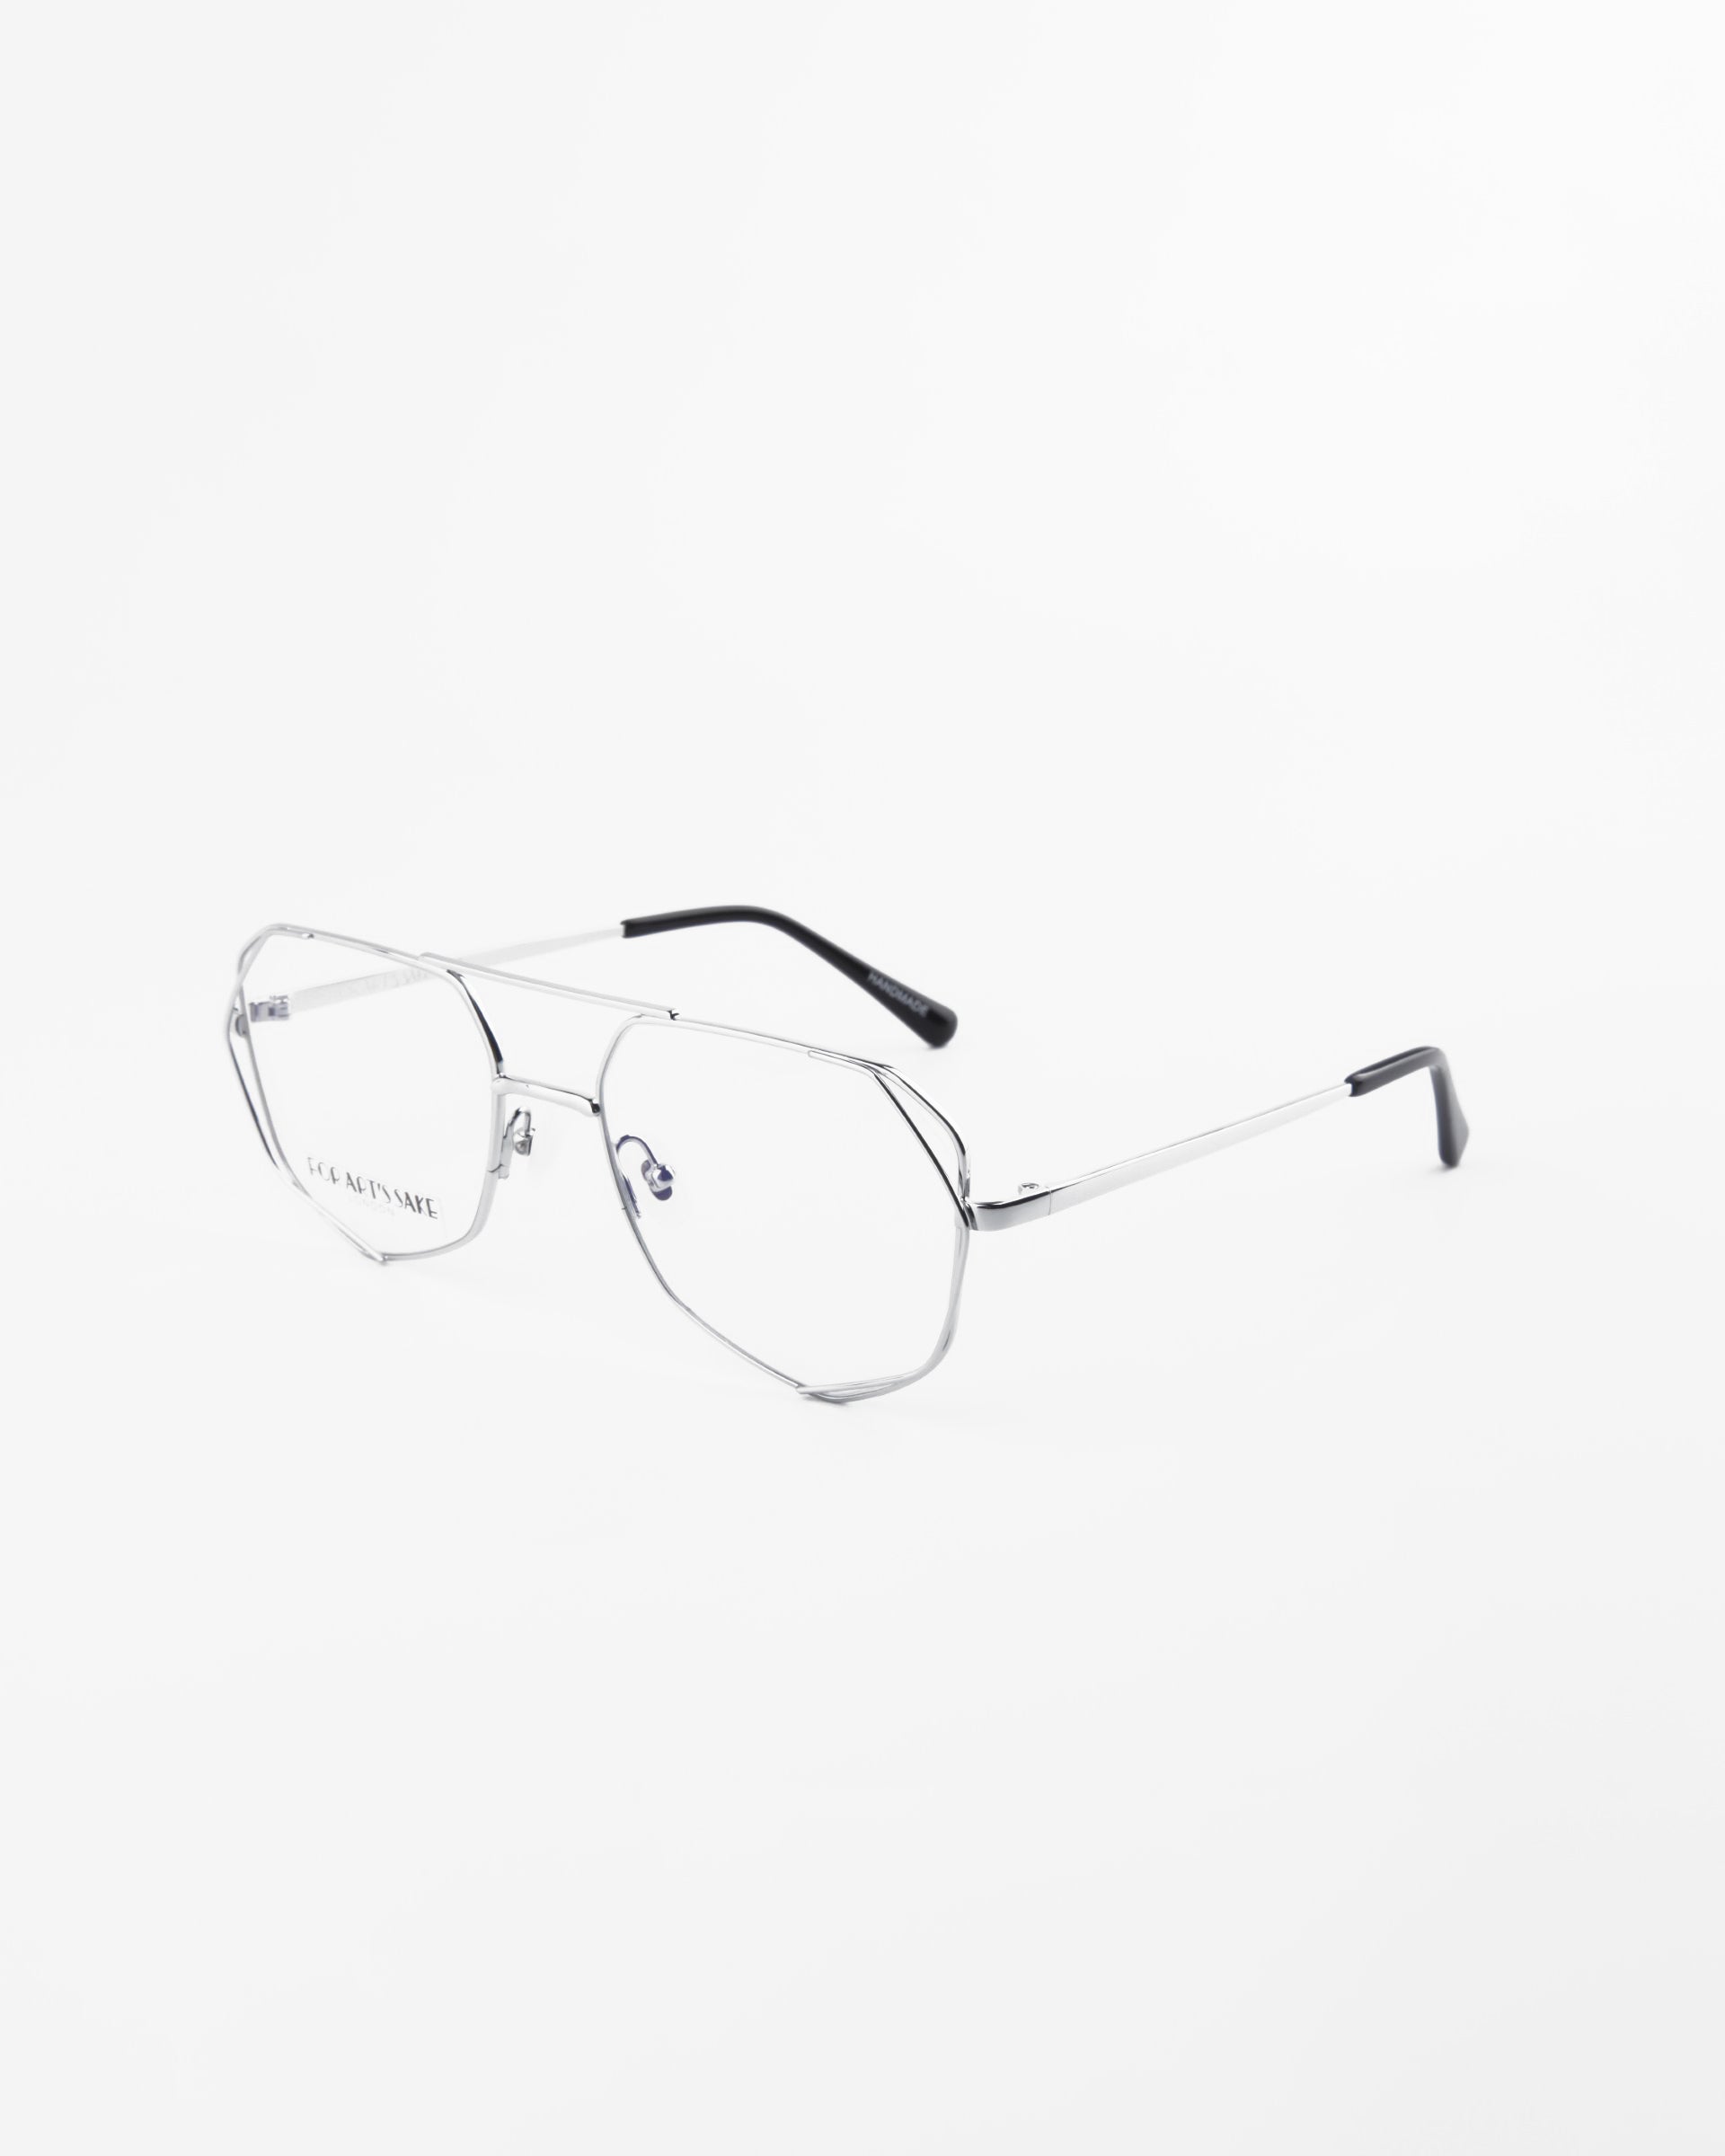 A pair of Genius Two by For Art&#39;s Sake® with thin, metallic frames and black tips on the arms is shown against a white background. The lenses are clear with a blue light filter, and the glasses have a modern, minimalist design. The frame brand name is visible on the left lens.